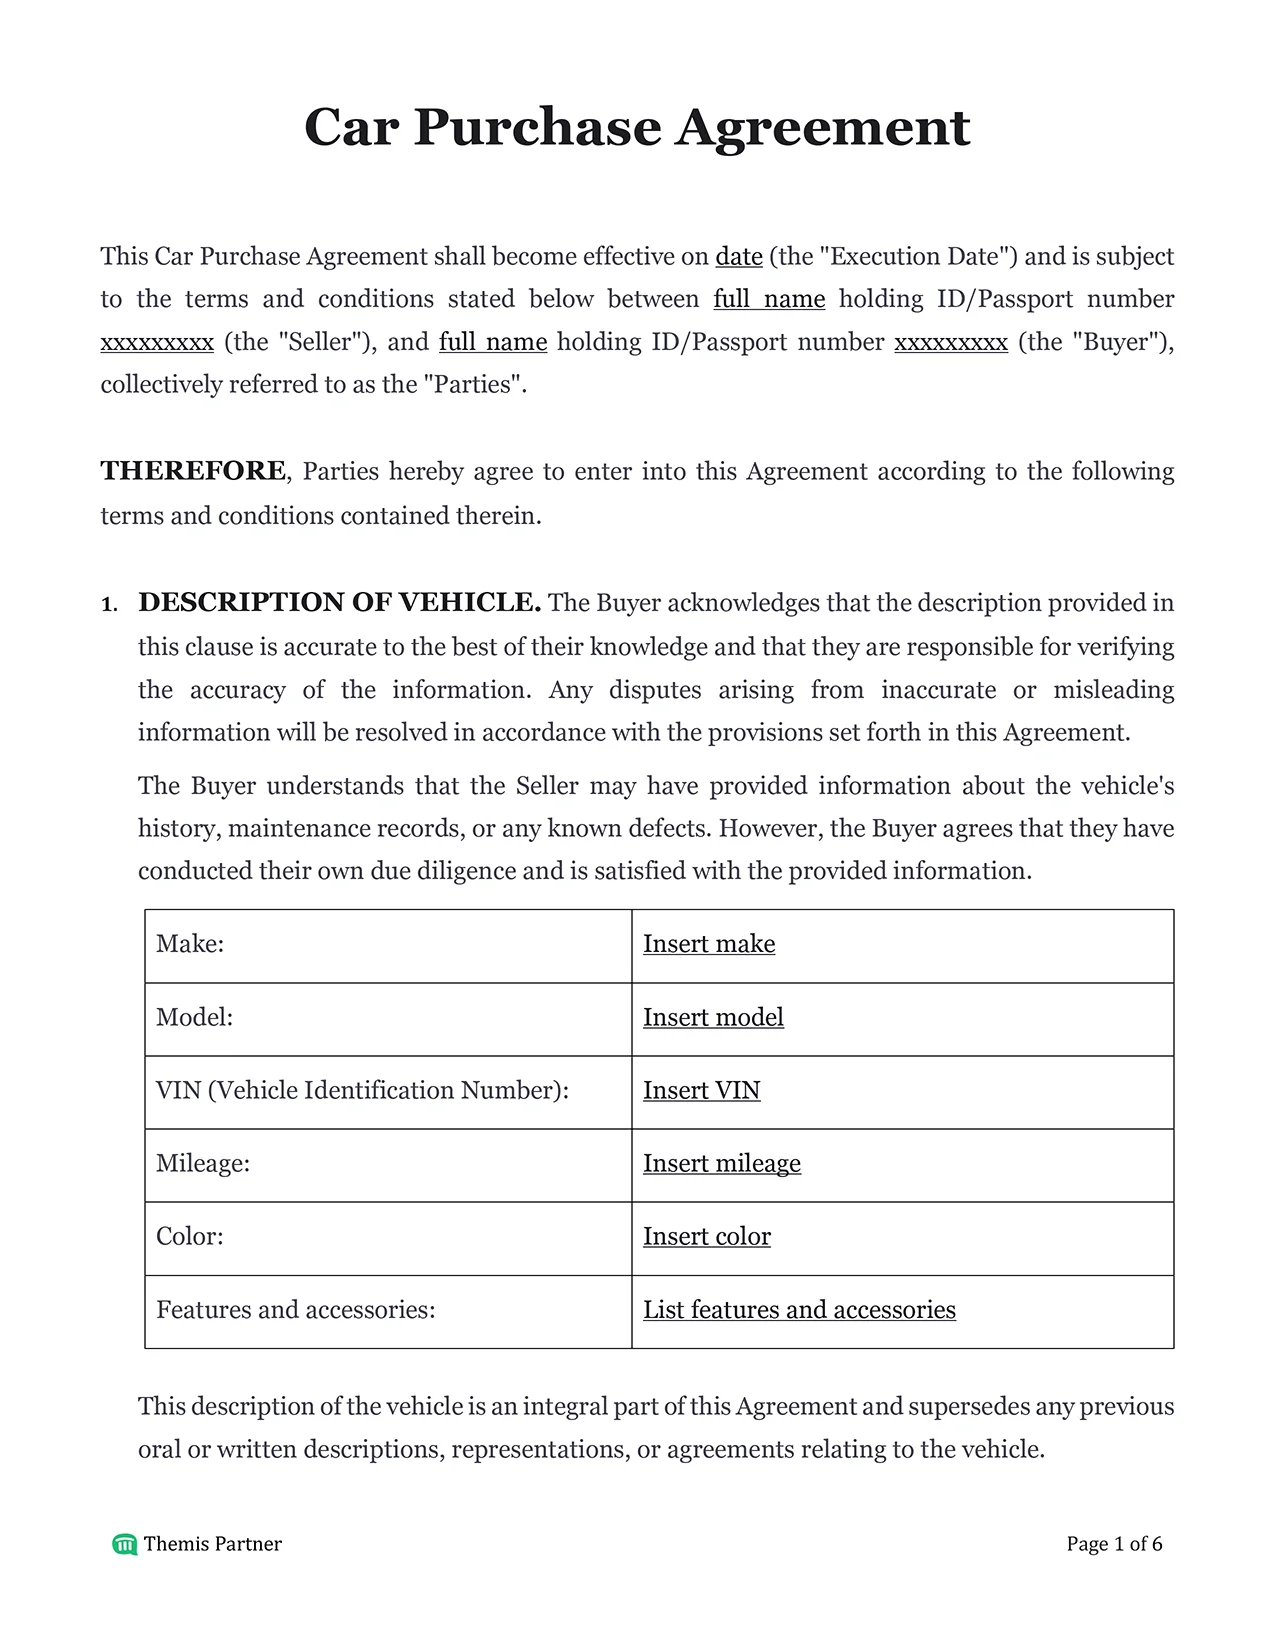 Car purchase agreement Singapore 1